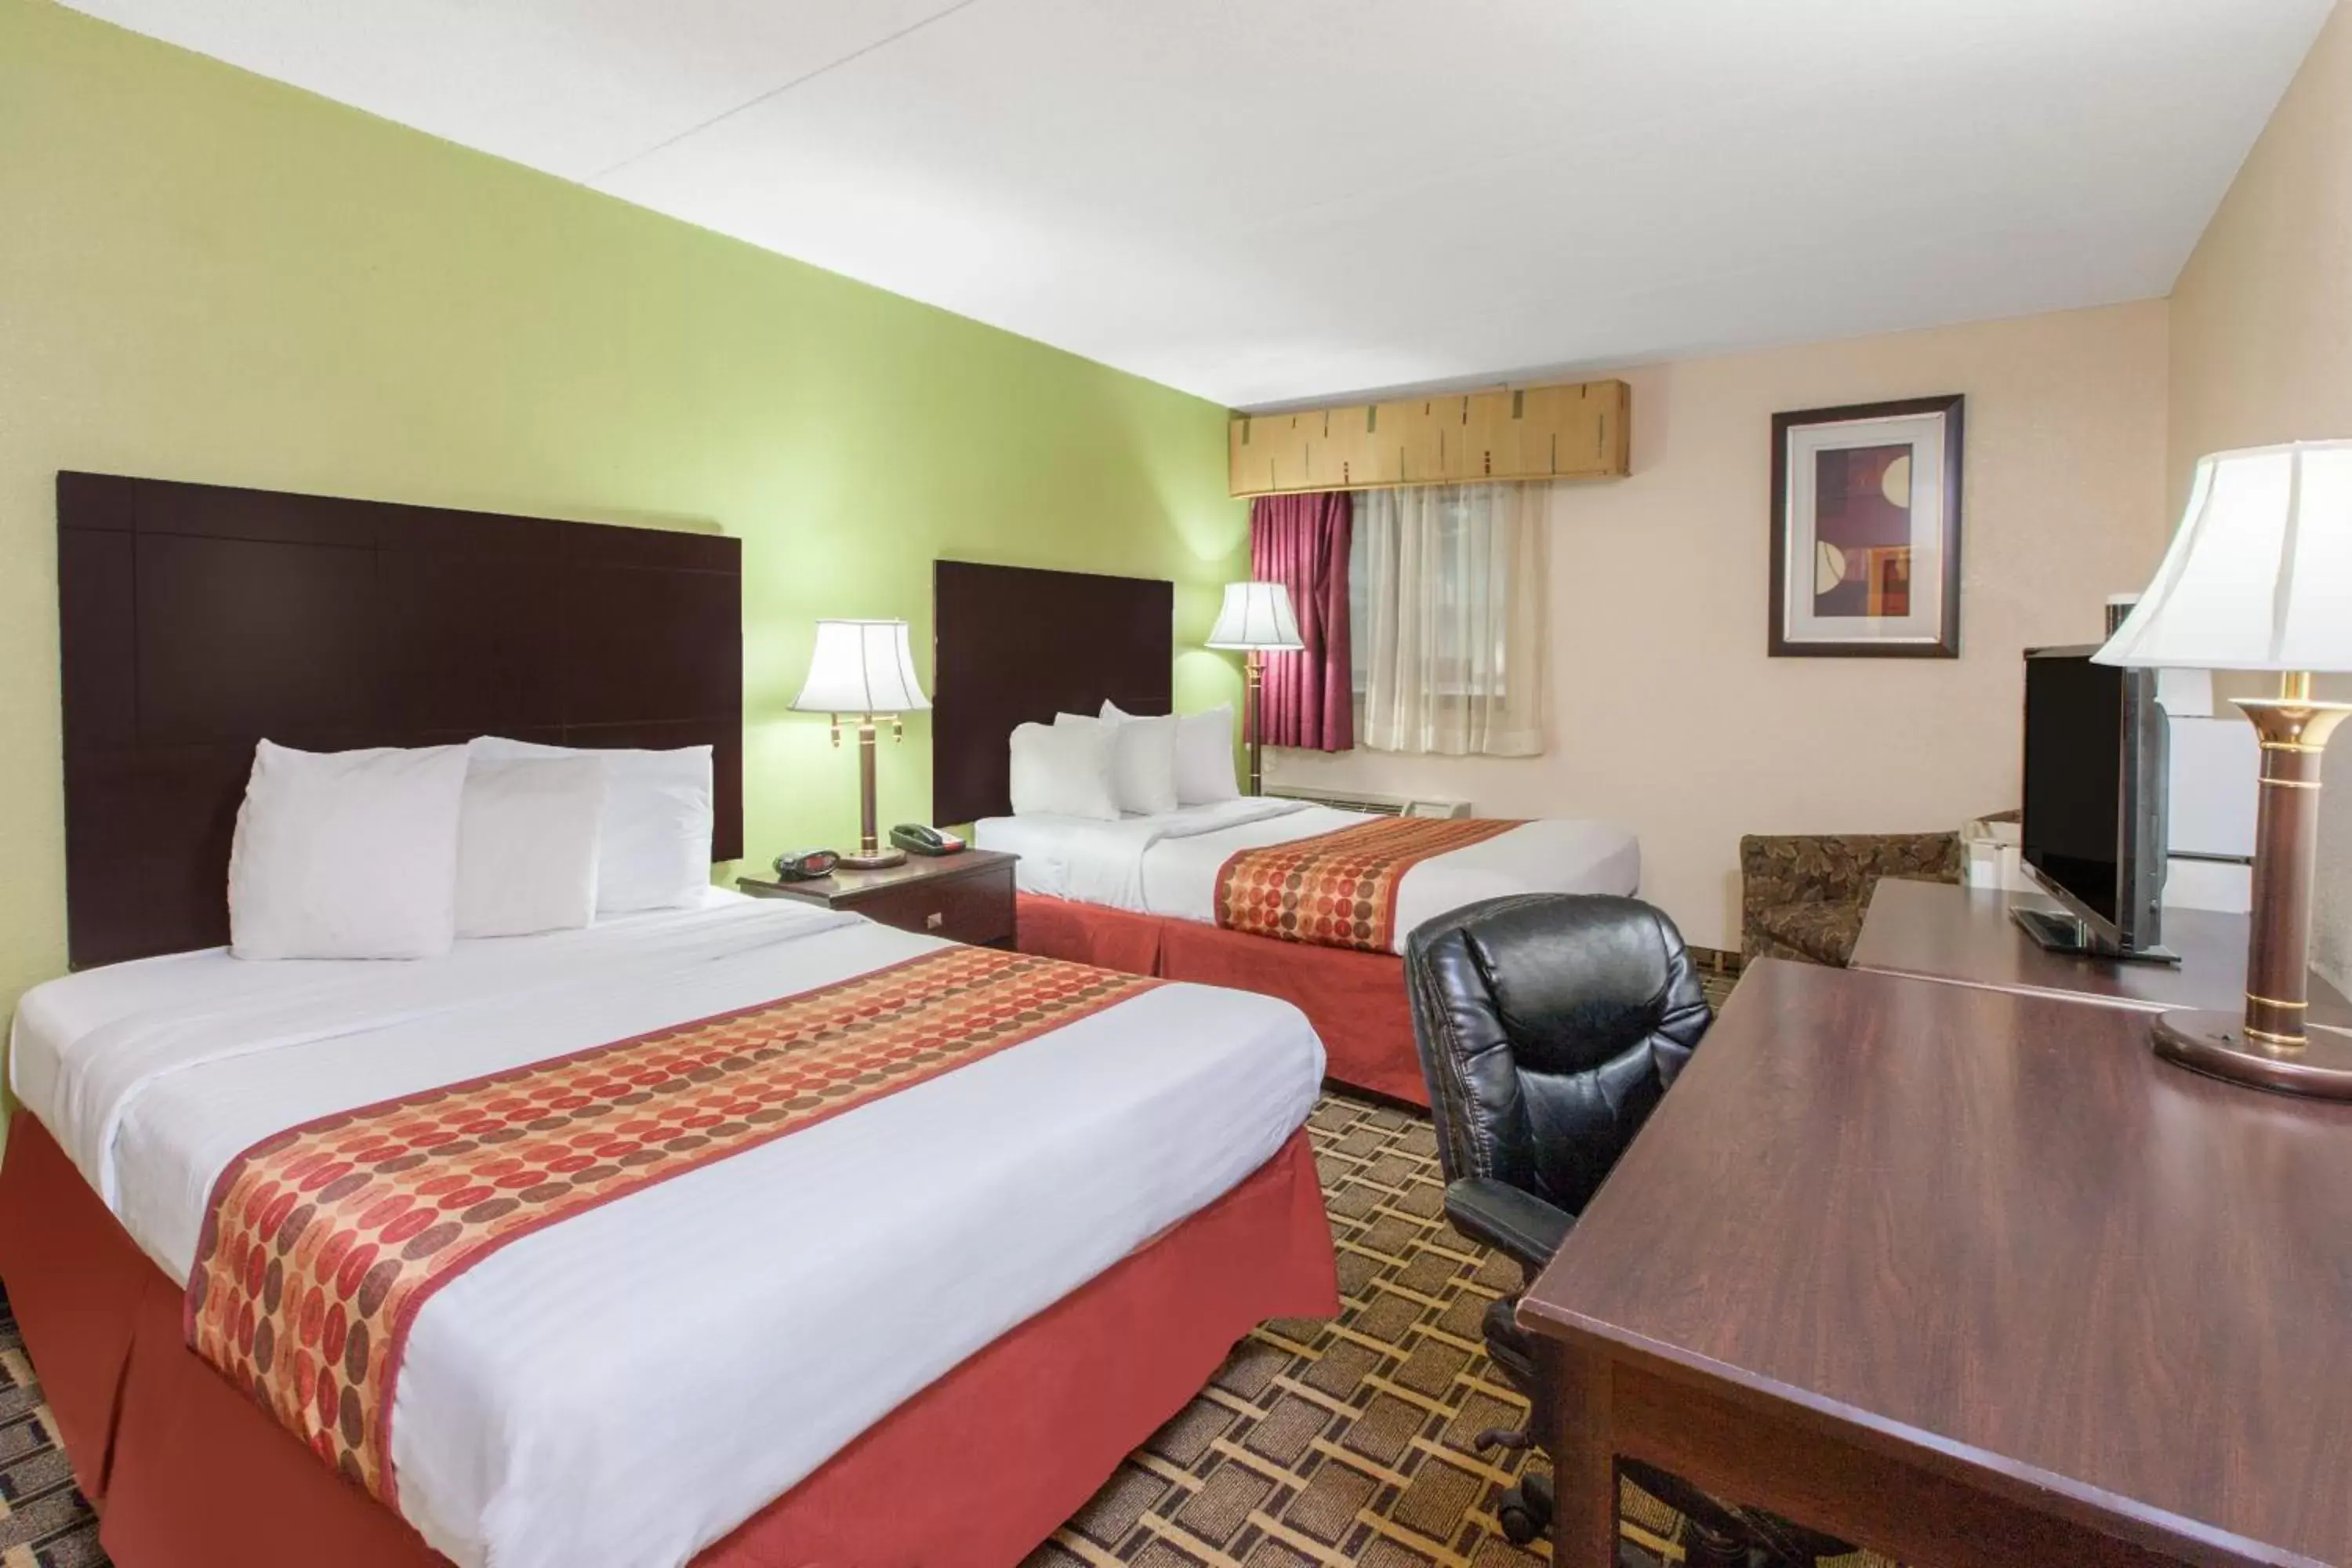 TV and multimedia, Room Photo in Days Inn & Suites by Wyndham Madison Heights MI